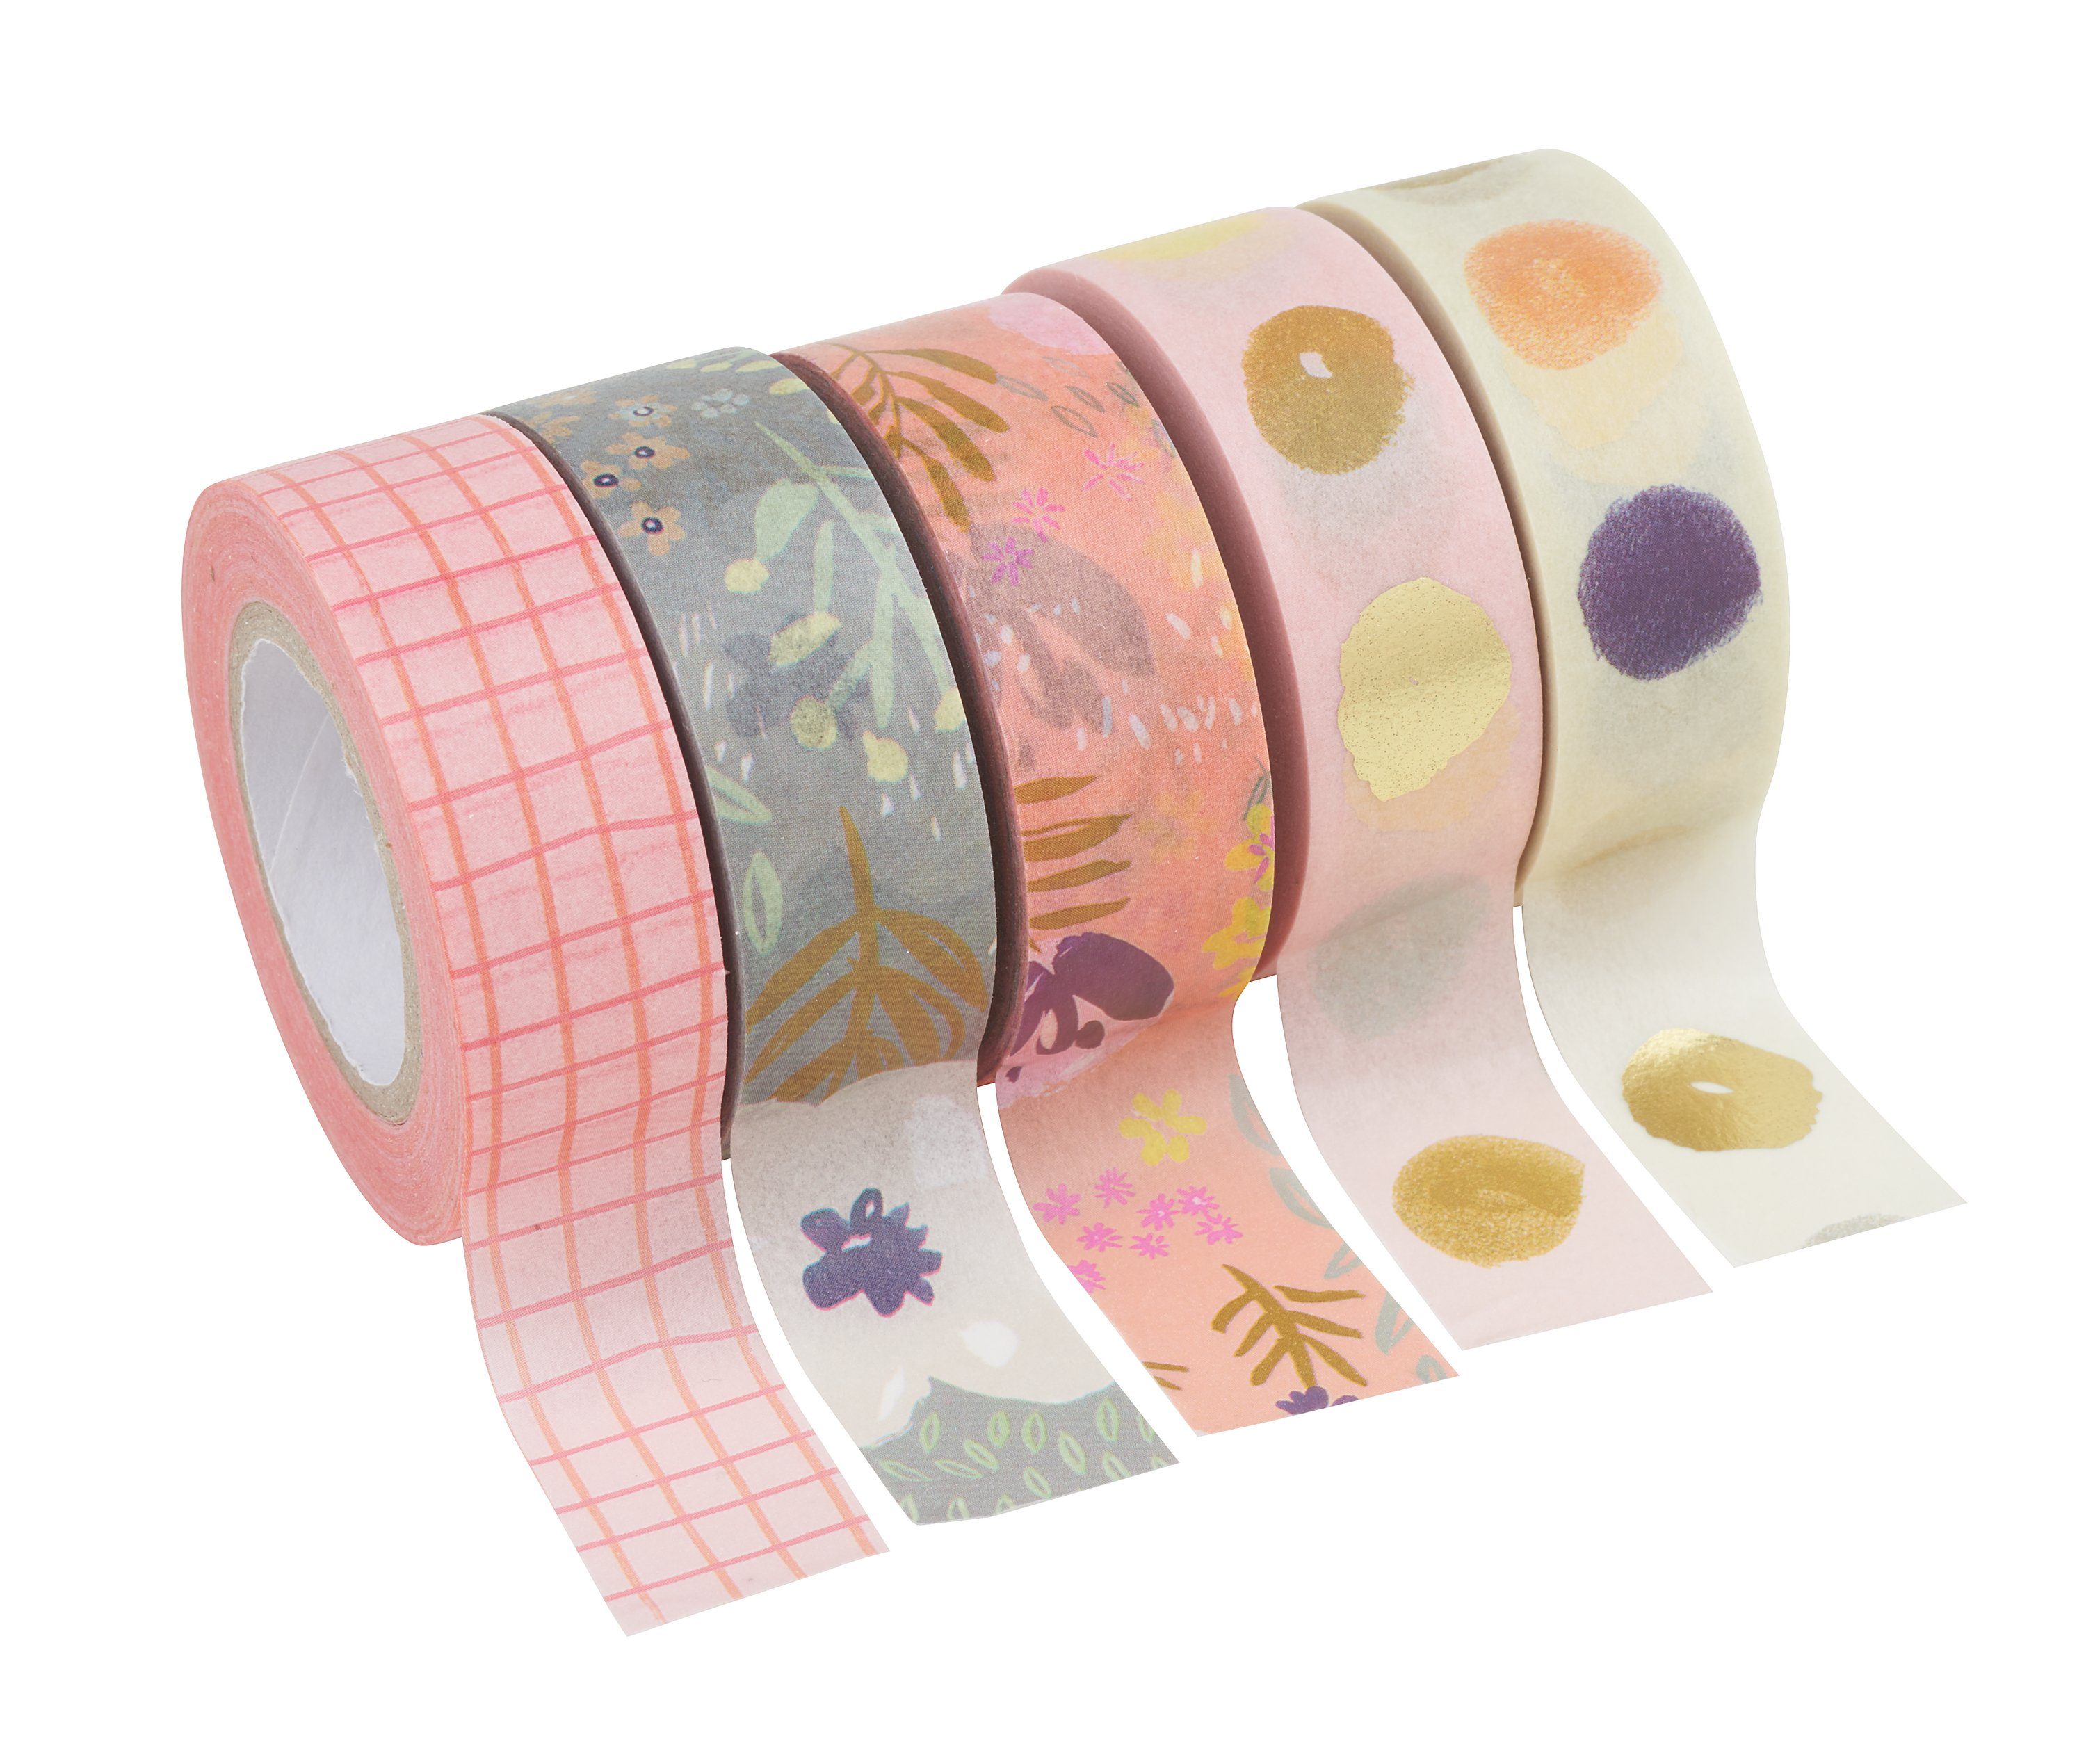 Paper Poetry Tape Sterne rot-gold 1,5cm 10m